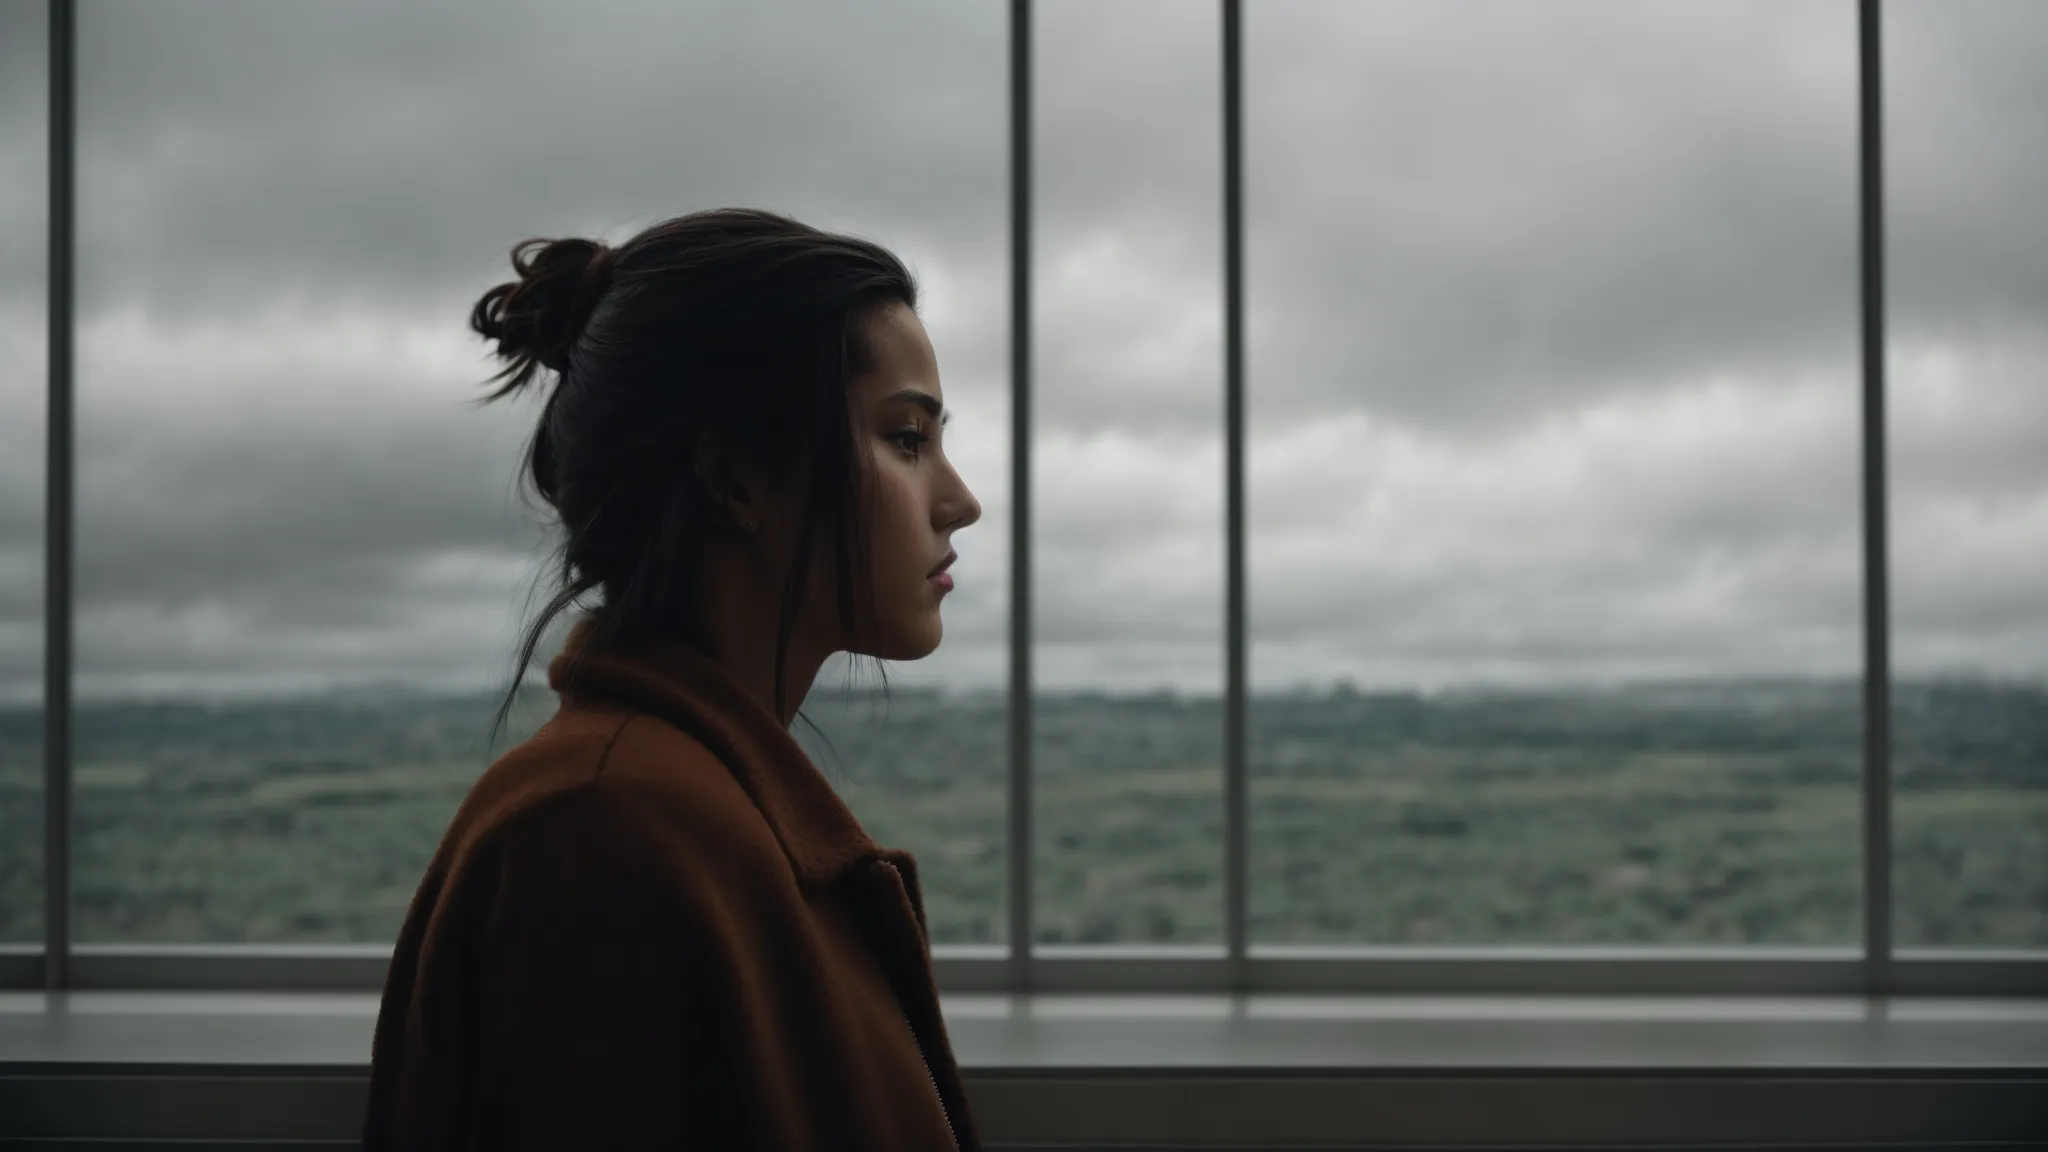 a person staring blankly out of a large window with an overcast sky in the background.